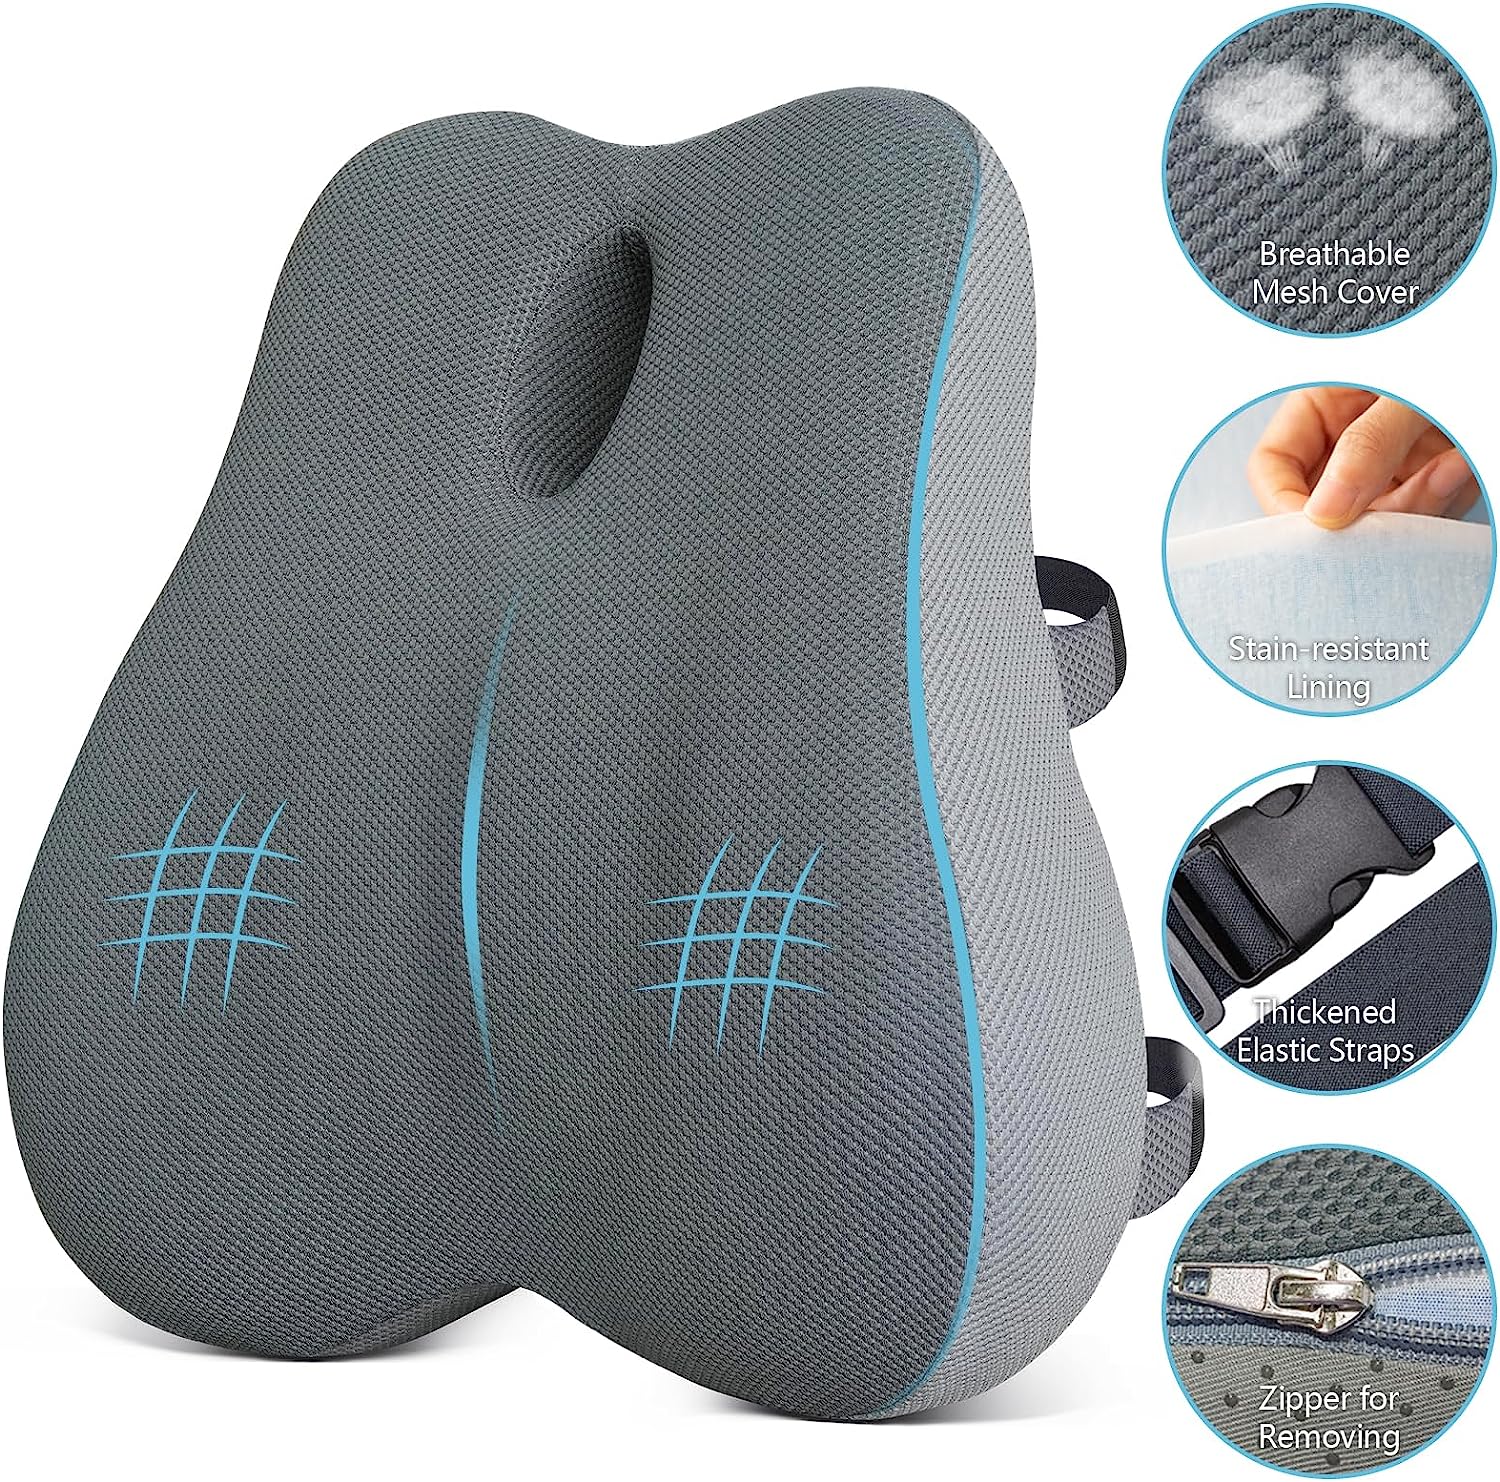 KingPavonini Lumbar Support Pillow for Office Chair, Grey